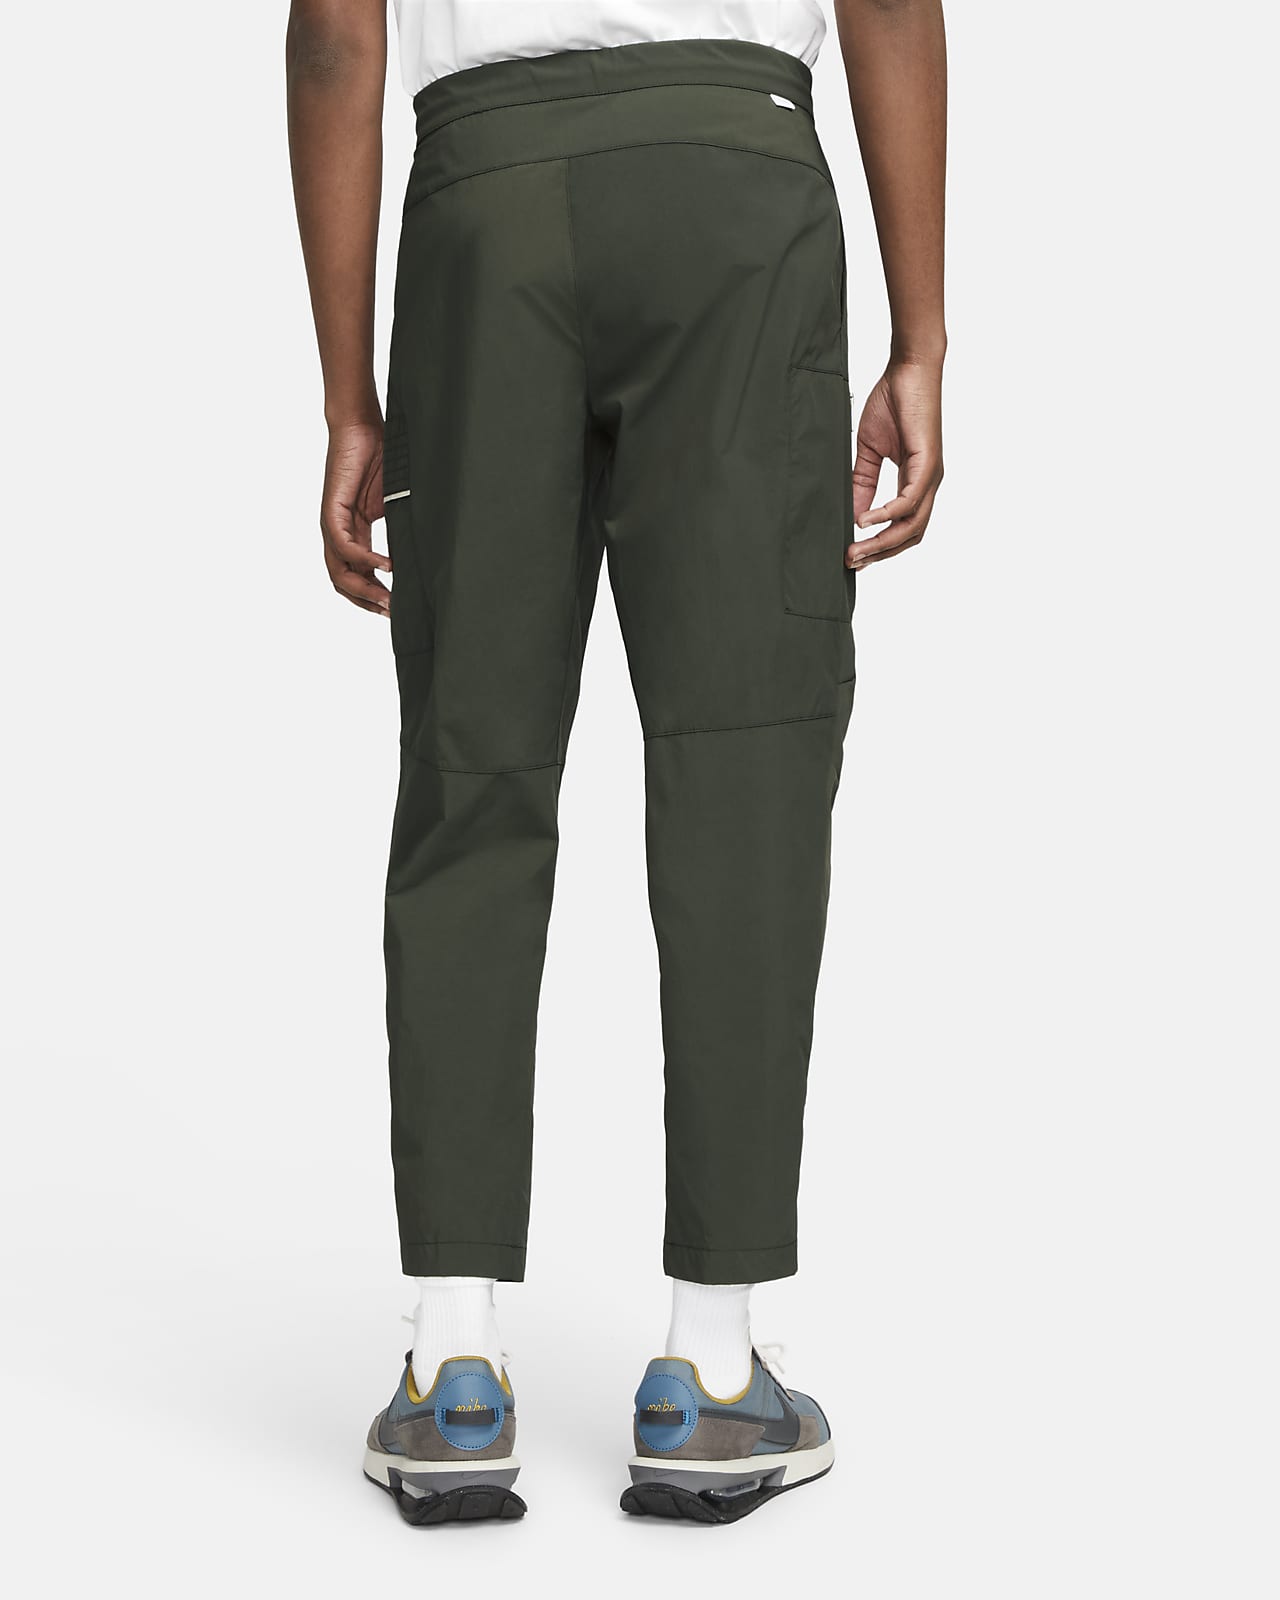 ALL SIZES **FREE DELIVERY** NEW Fox Collection Combat Trousers Green & Silver 